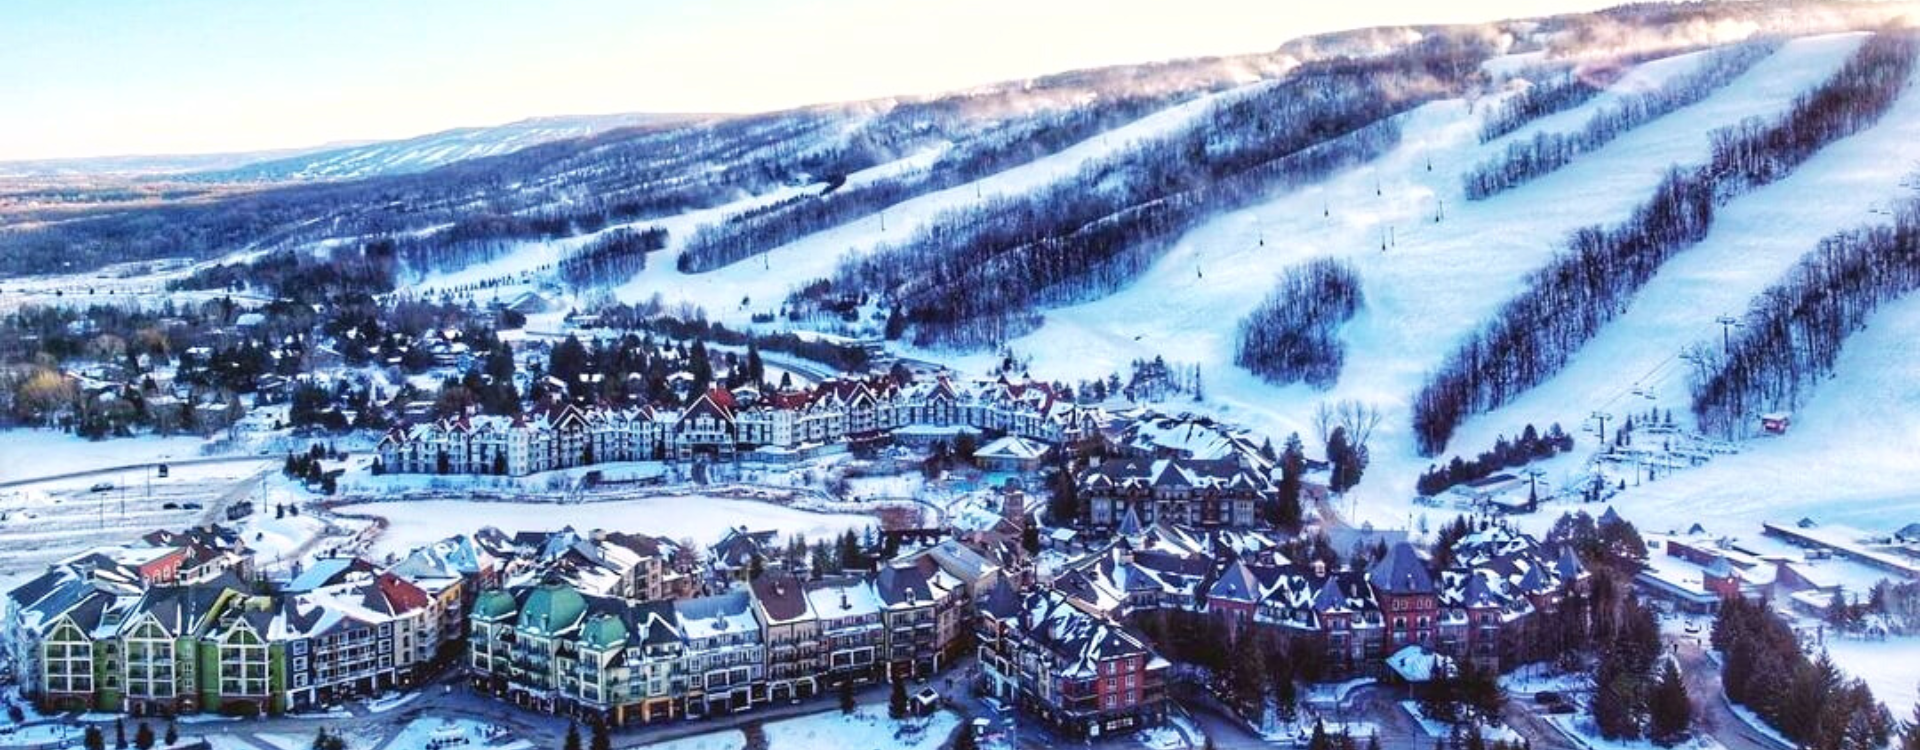 A stunning birds-eye view of the Village and Mountain landscape covered in a blanket of fresh snow.